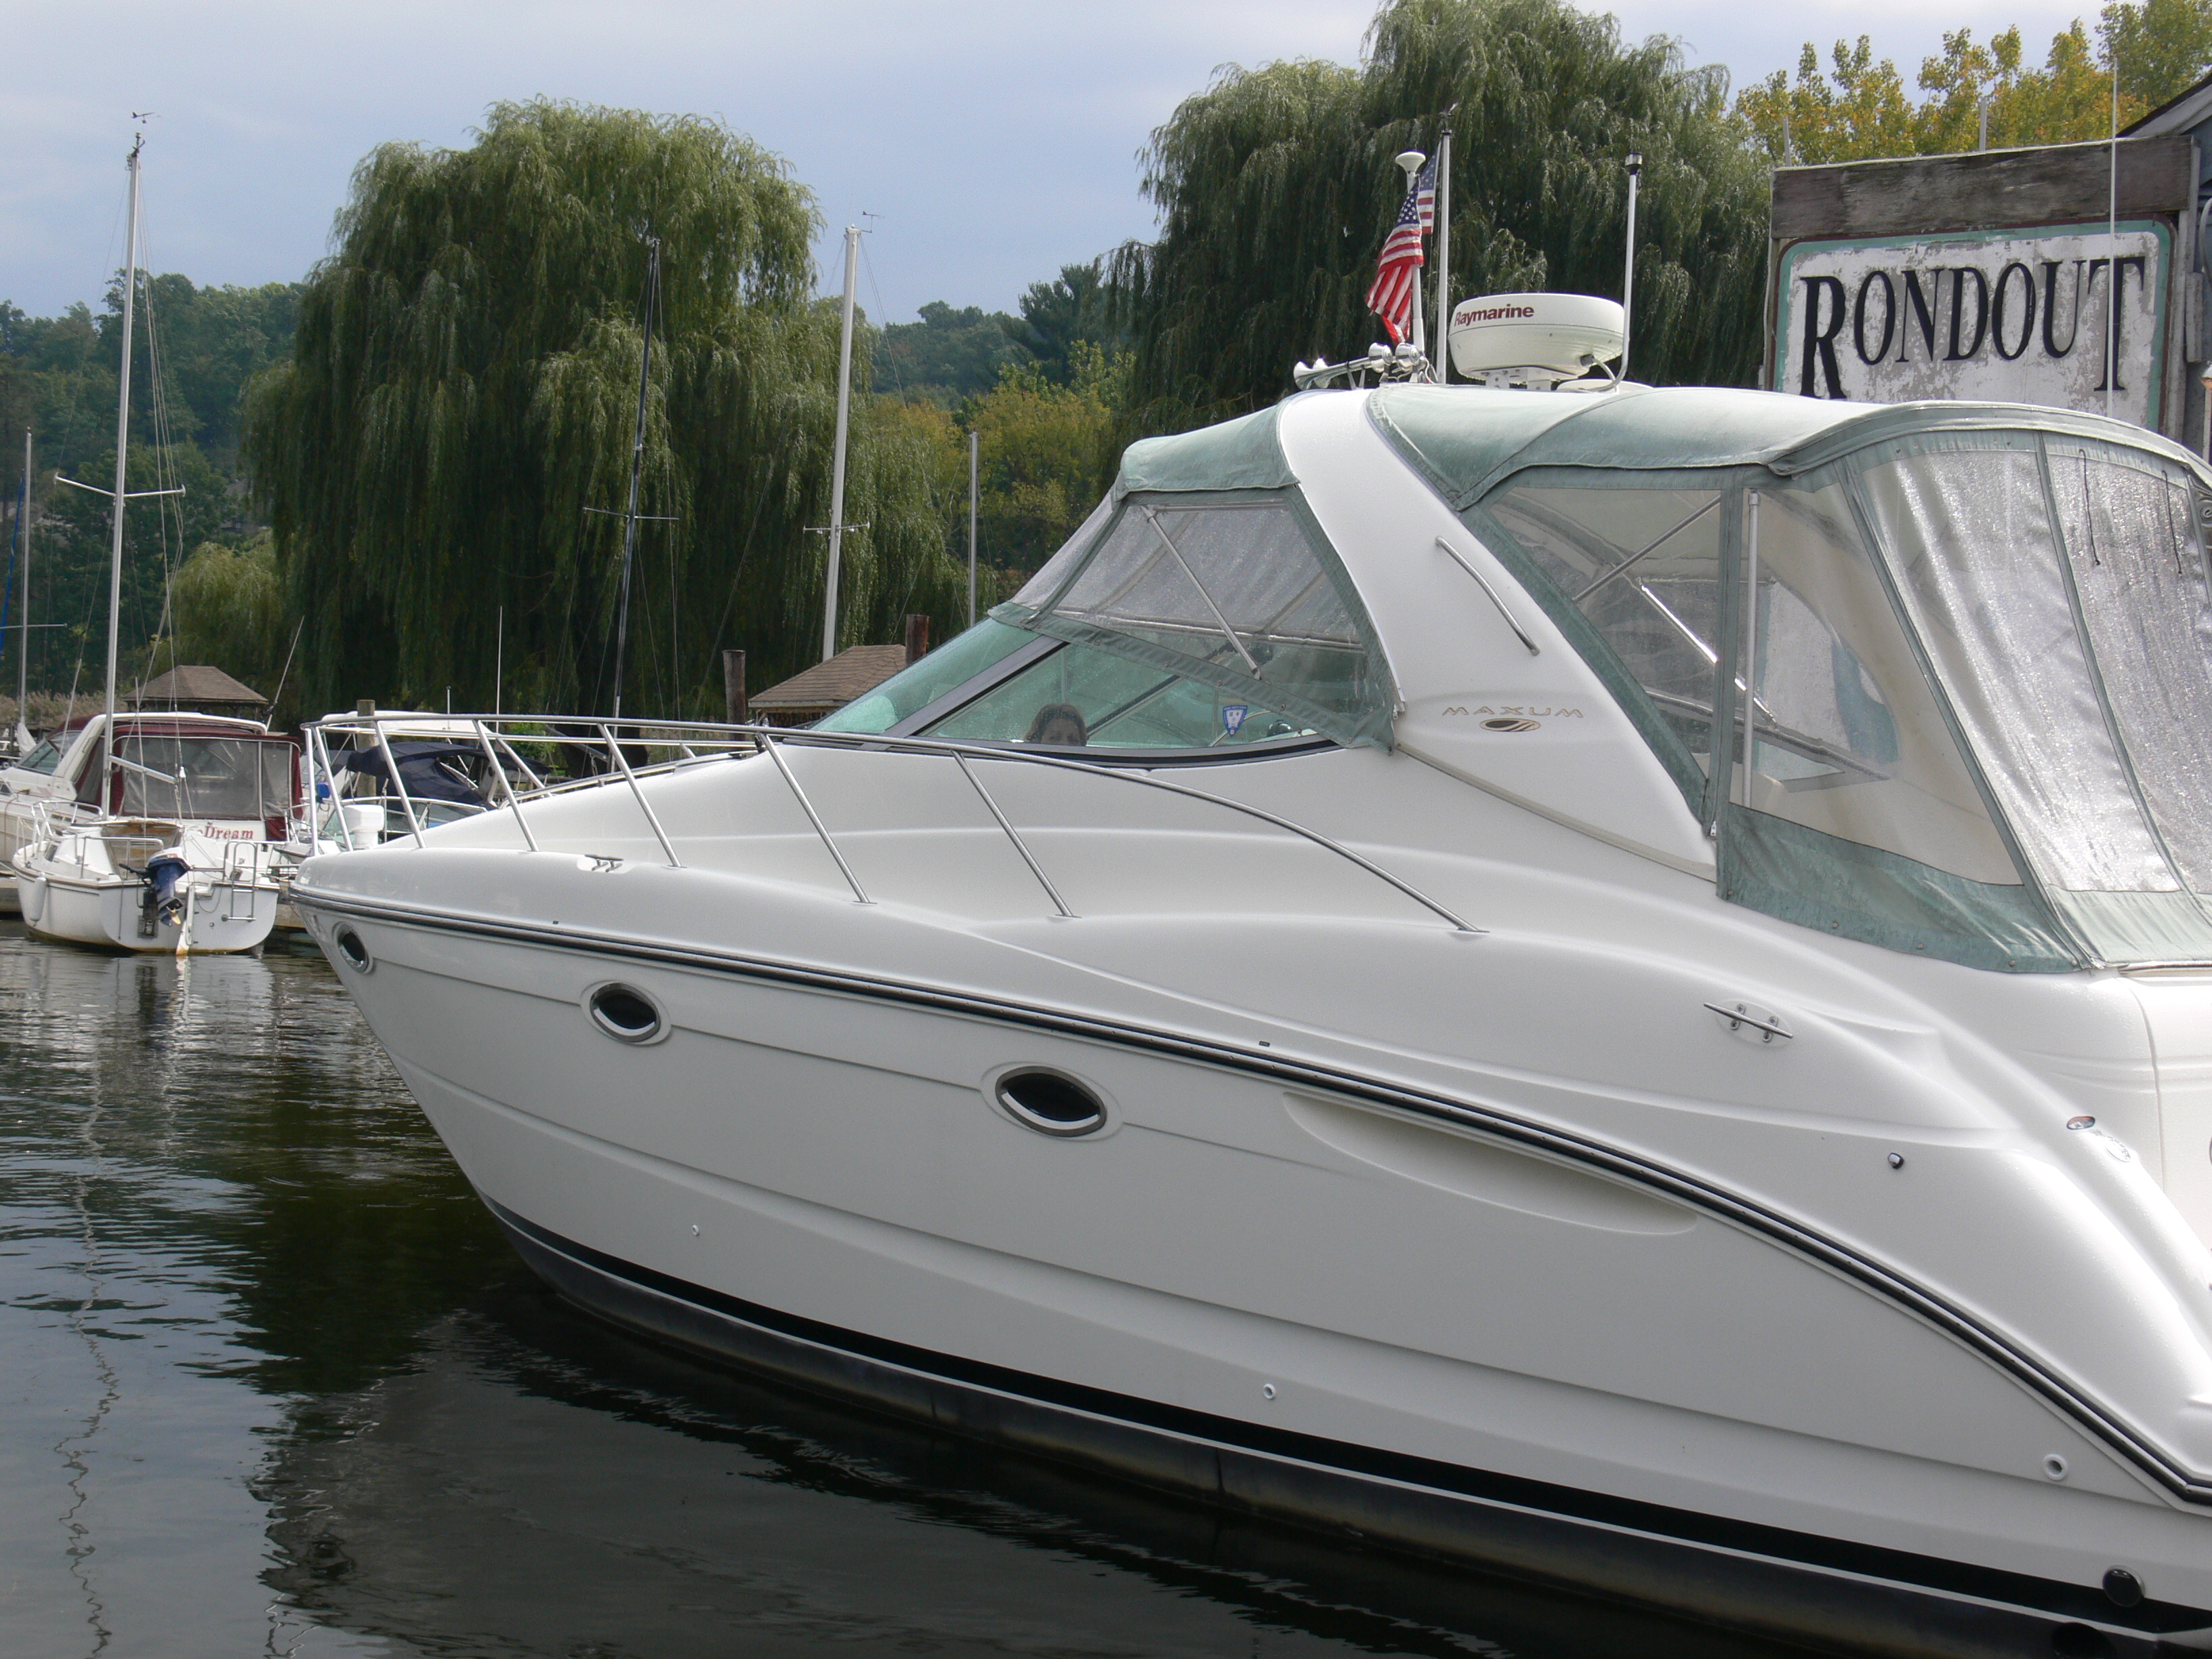 Boatsville - New and Used Maxum Boats in New York